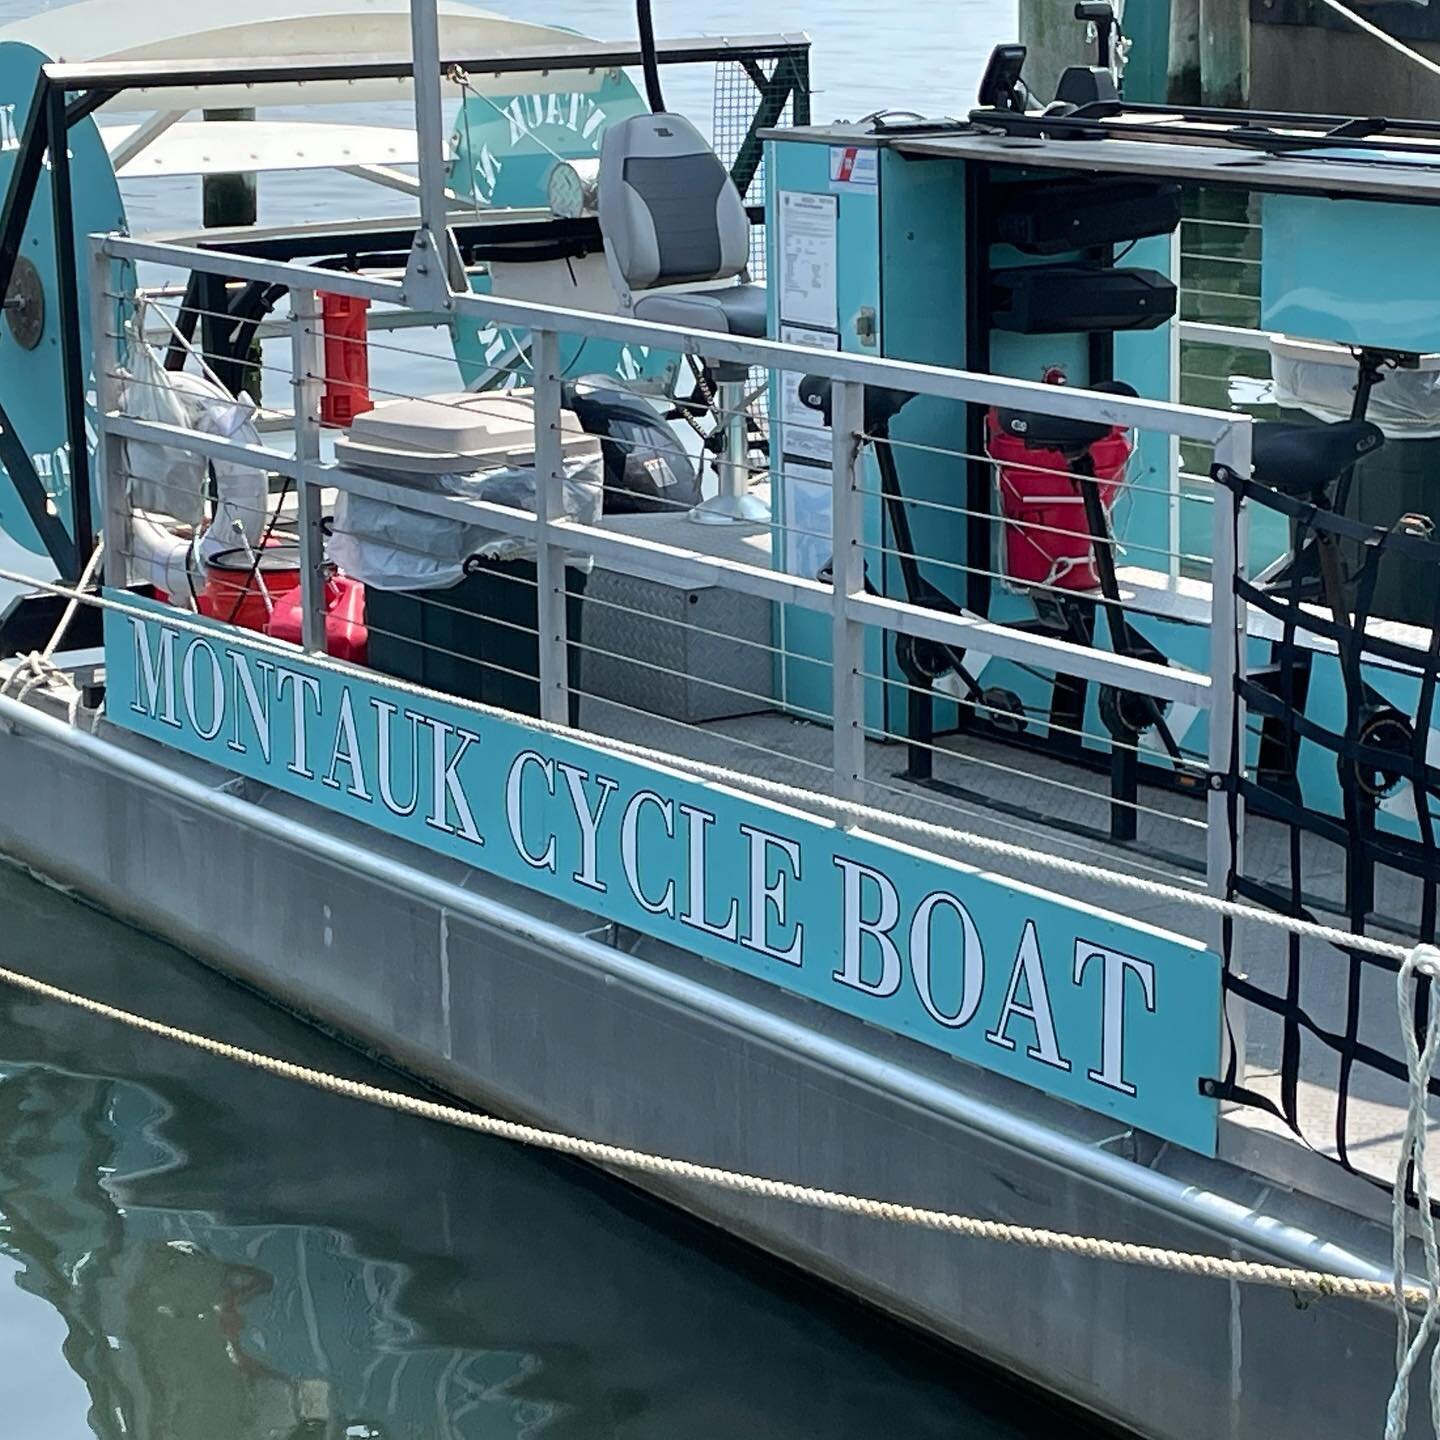 Thank you @oceangraphicseh for the new lettering. Now everyone will know who we are when we pass @gosmans_montauk on the way to @samsstarislandyc and @liars_saloon